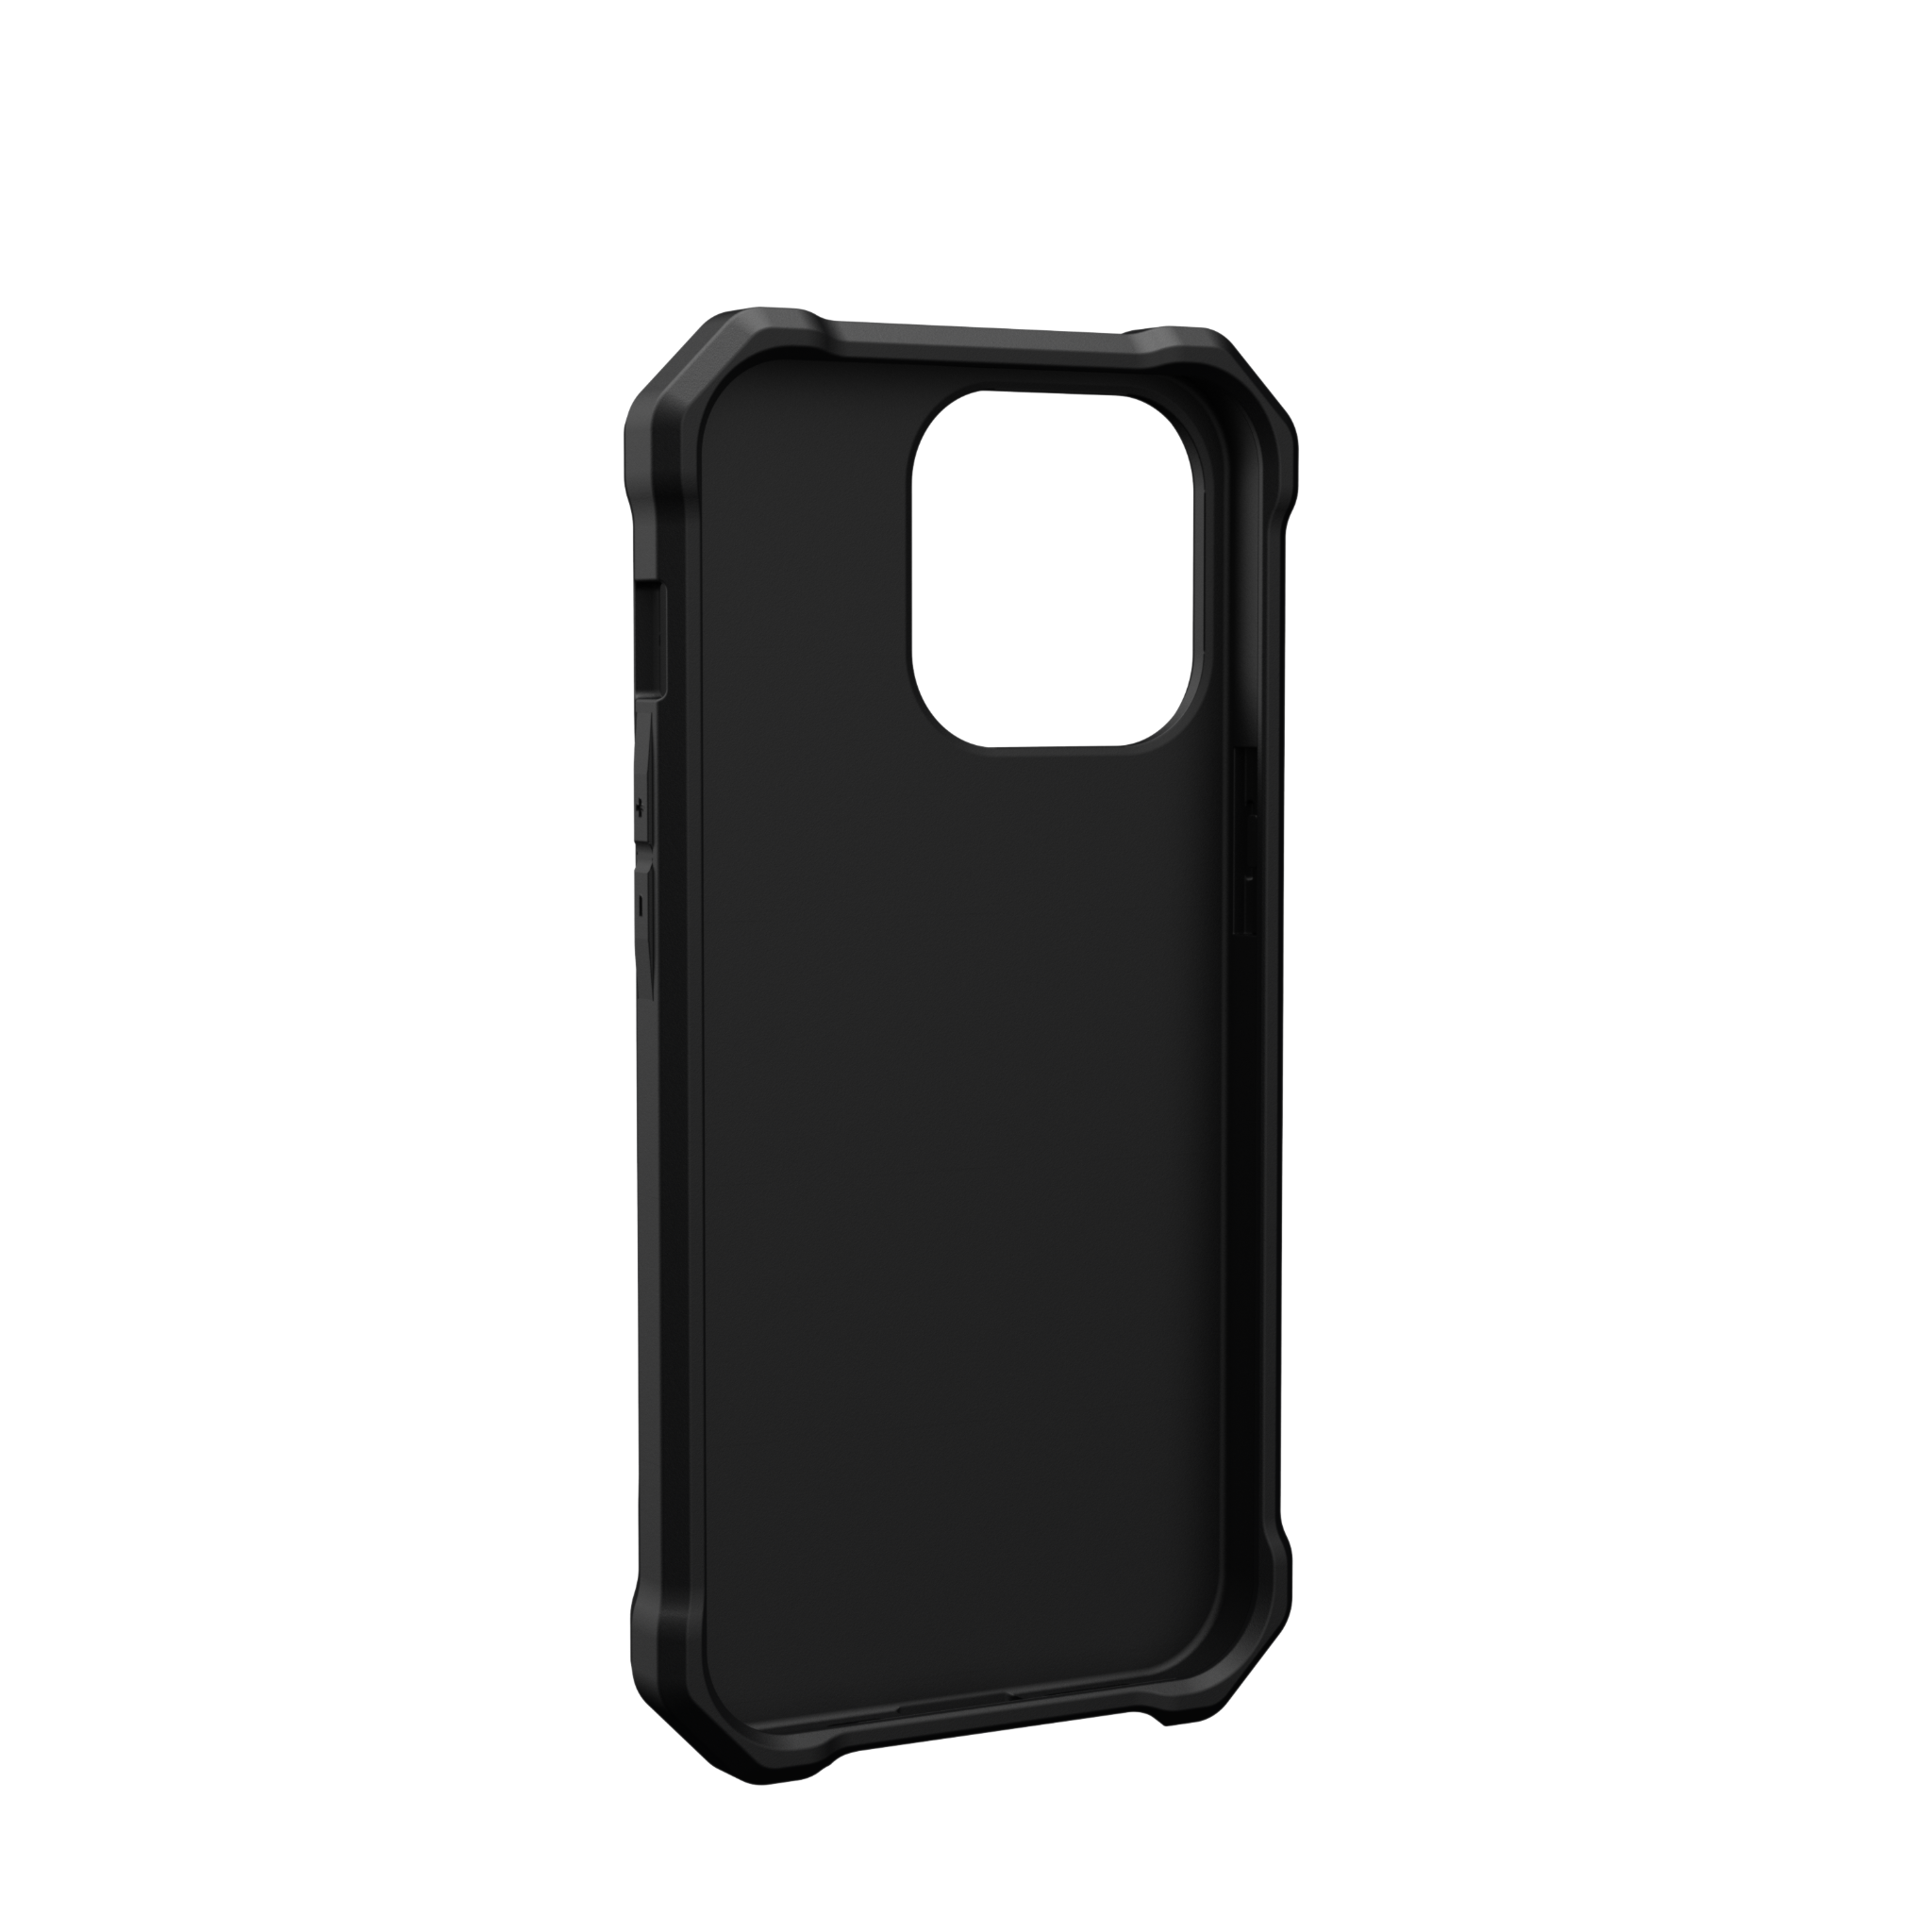  Ốp lưng Essential Armor cho iPhone 13 Pro [6.1 inch] 